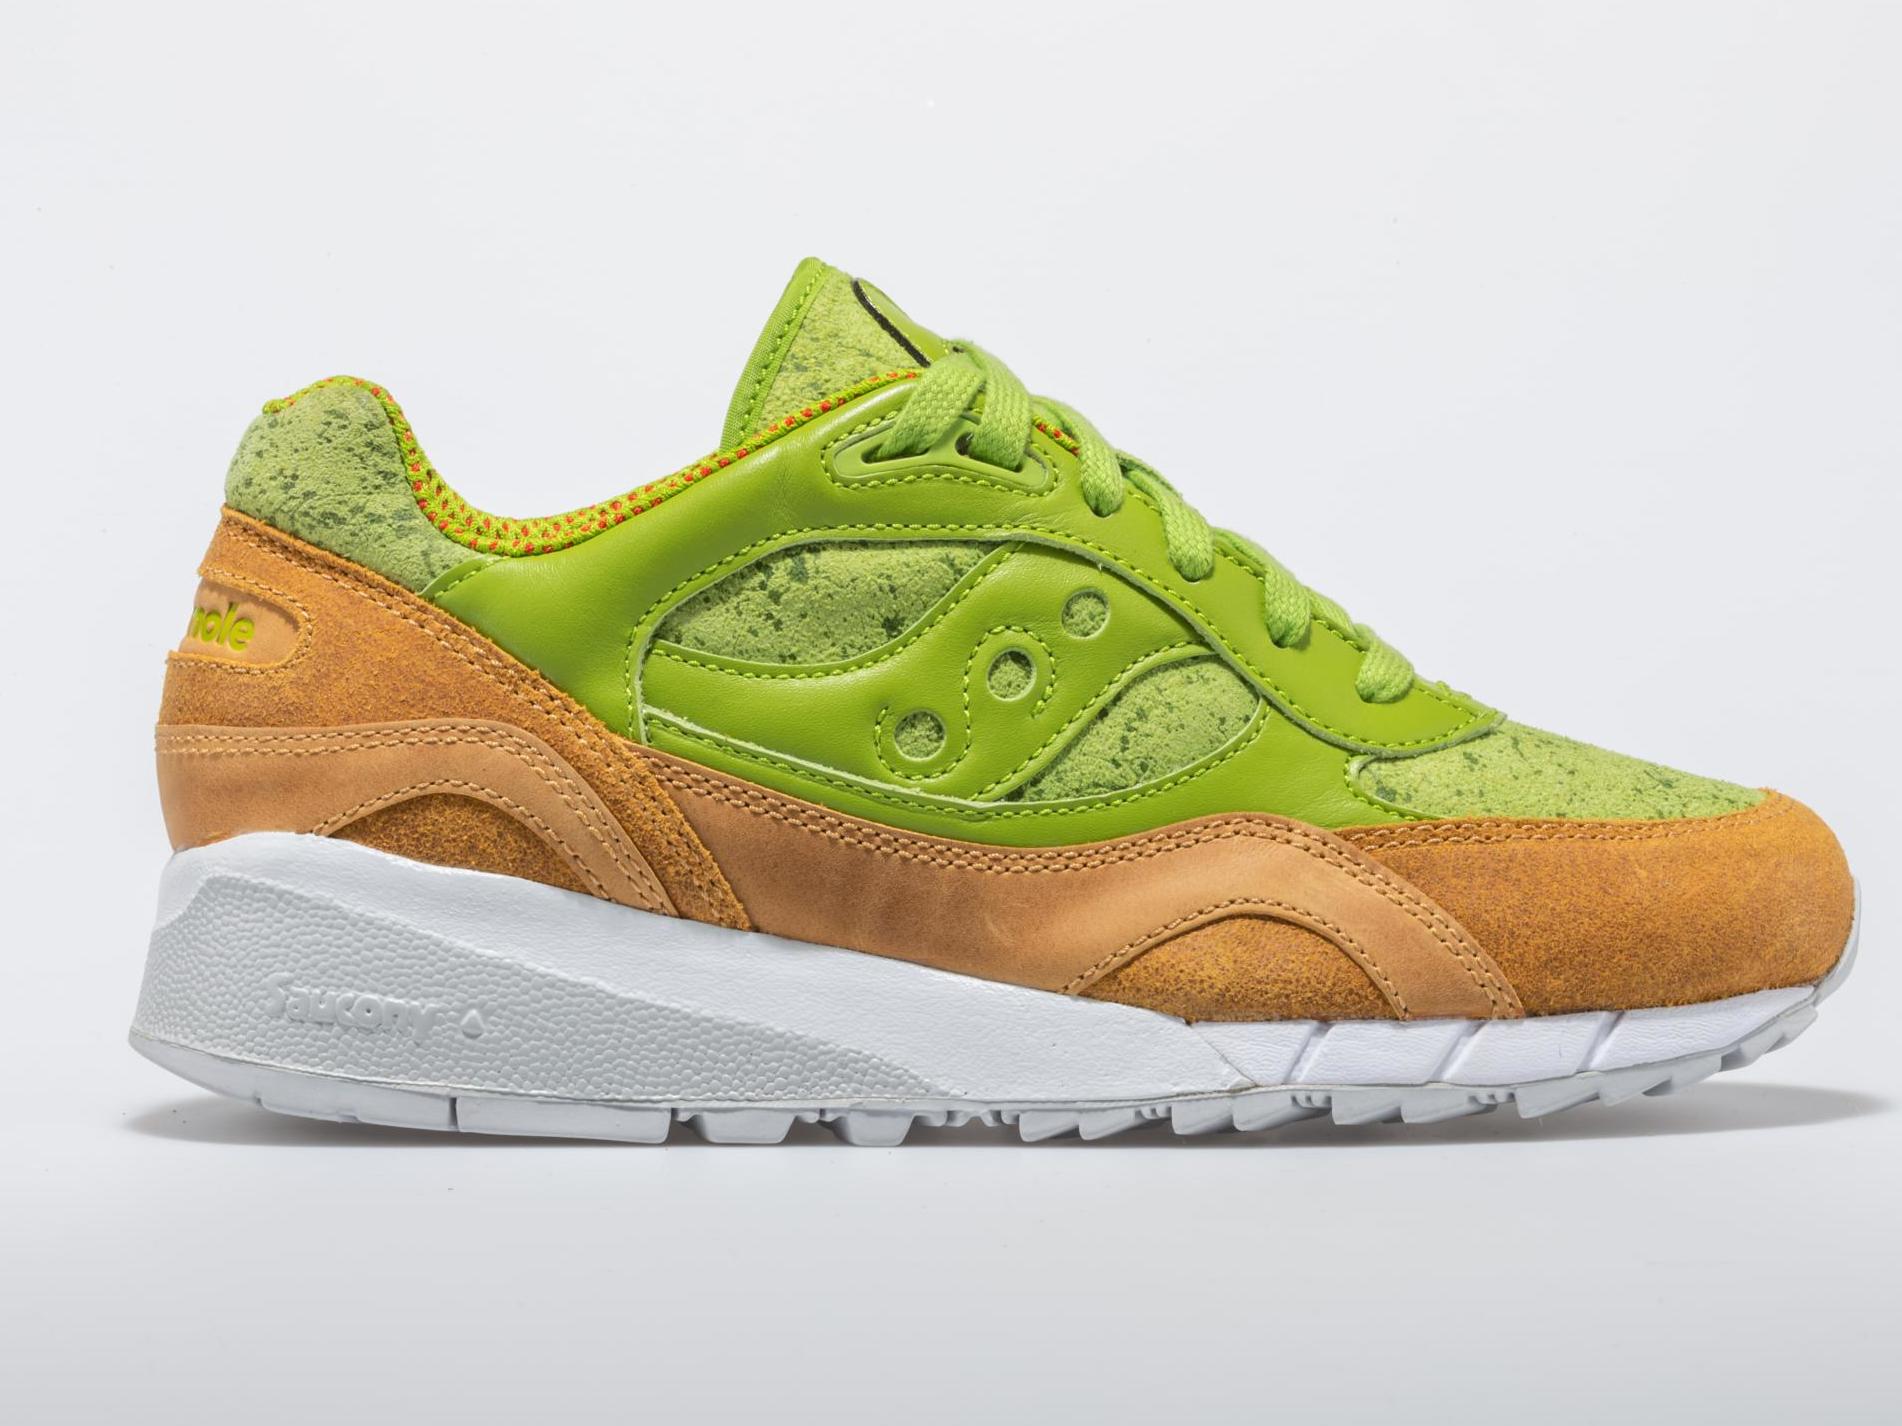 The 'Avocado Toast' trainers retail at $130 at Saucony